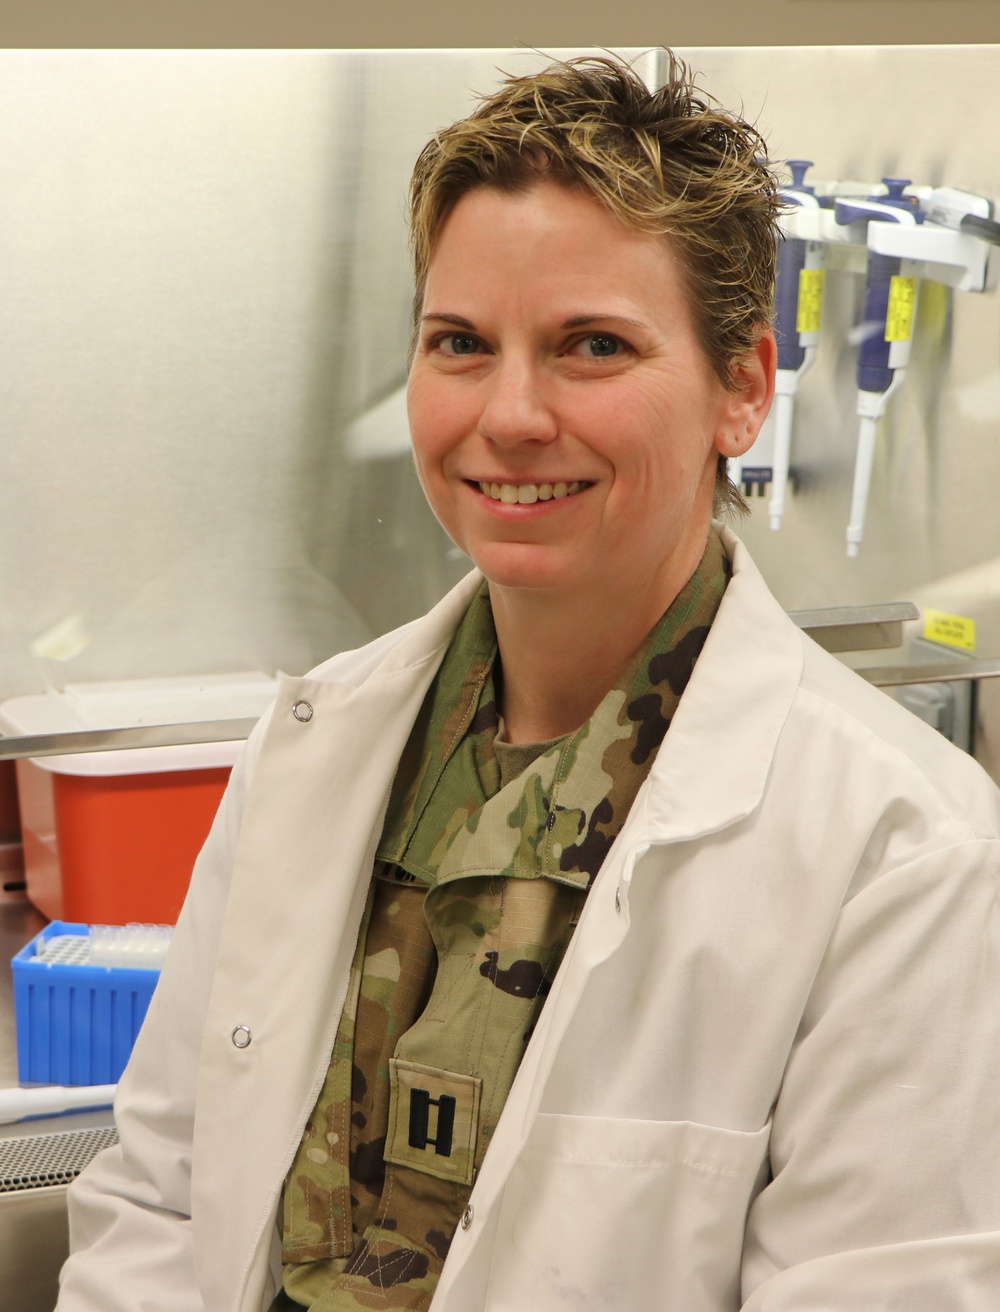 From Scientist to Soldier: Researcher Fulfills Lifelong Dream in Joining U.S. Army Reserve